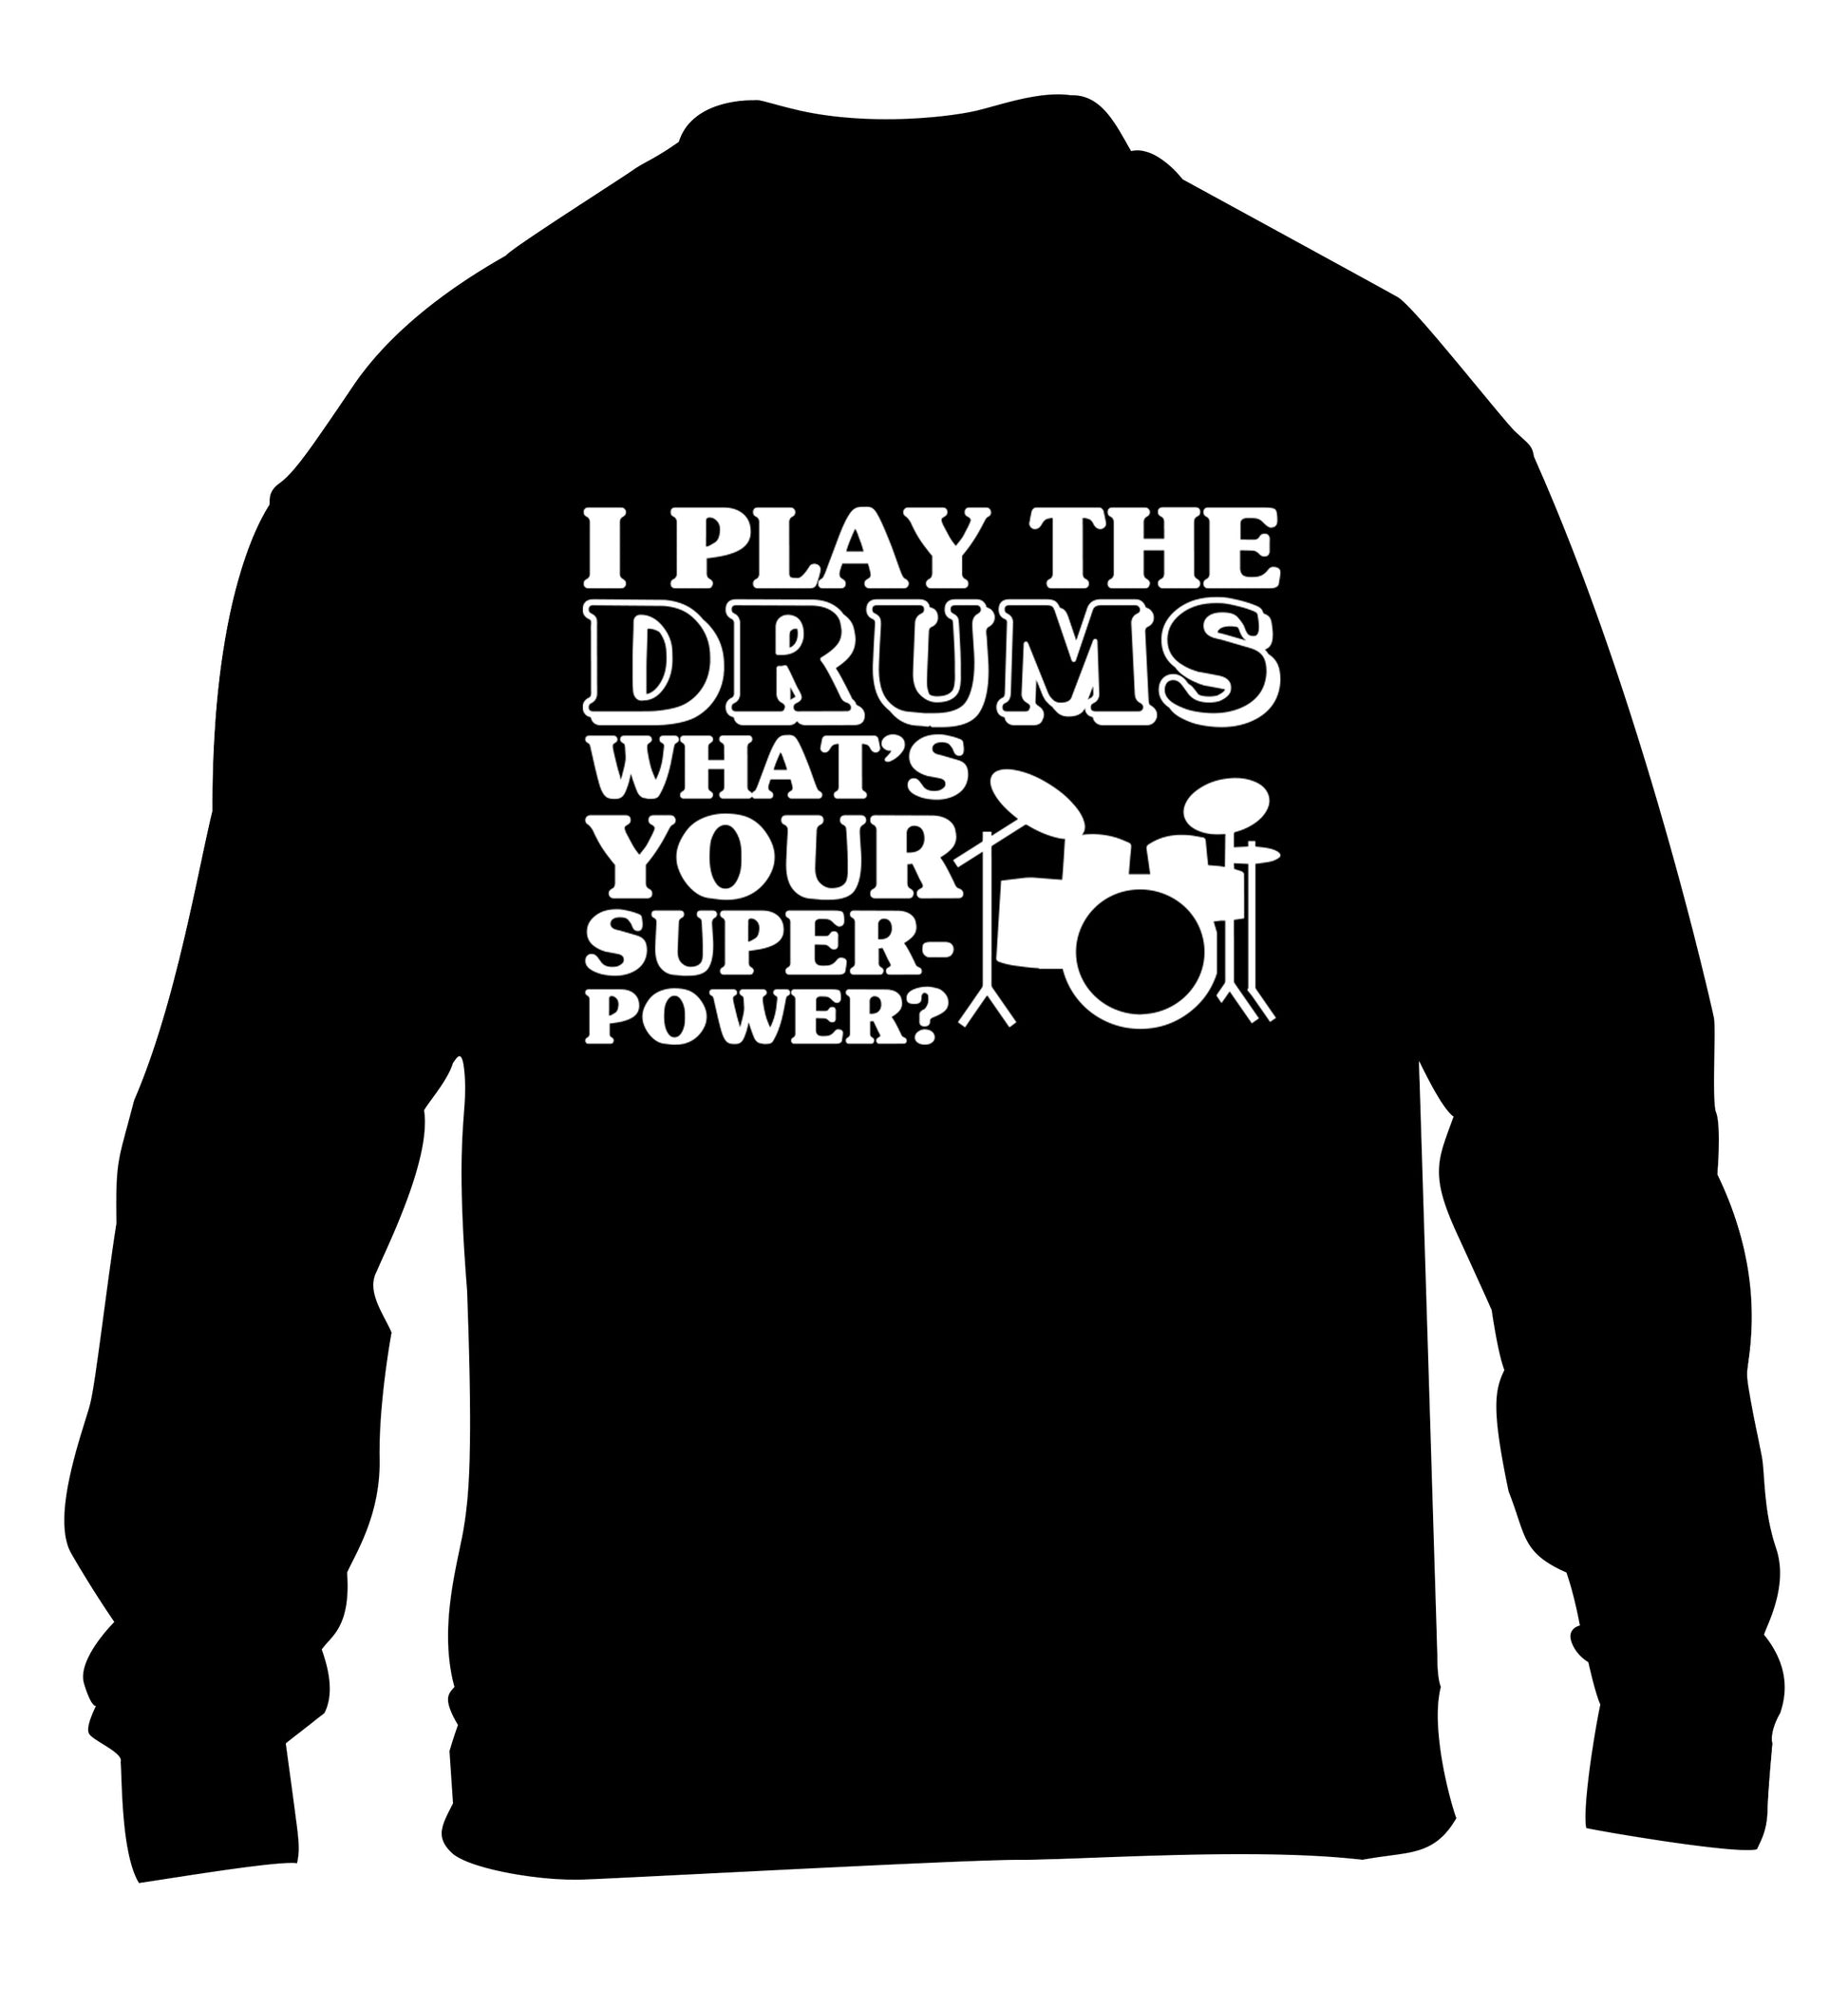 I play the drums what's your superpower? children's black sweater 12-14 Years